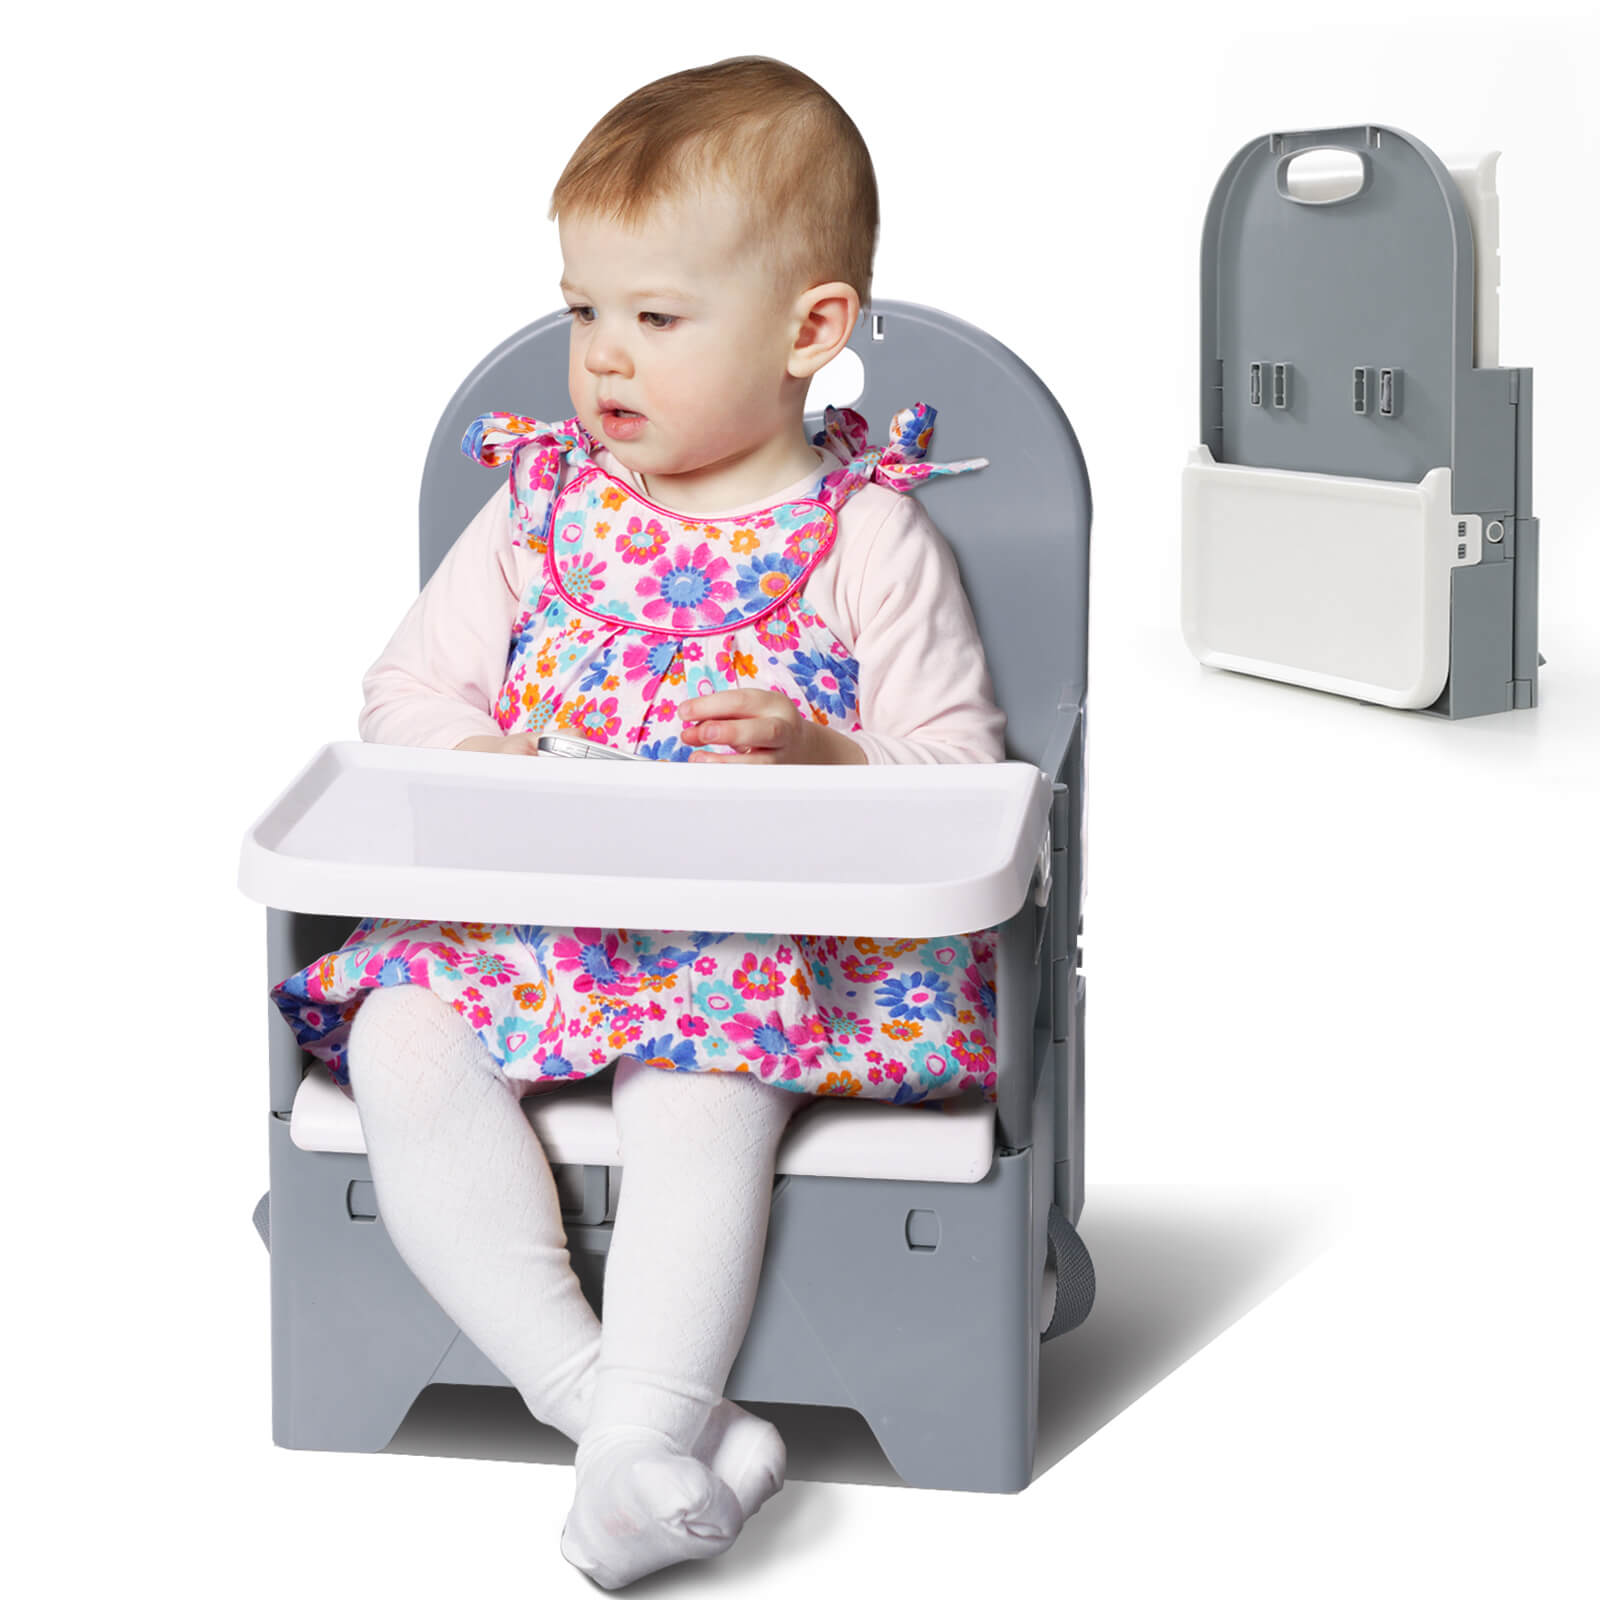 BABELIO Portable Baby Booster Seat - Foldable Dining Chair with Adjustable Tray for 6-36 Months